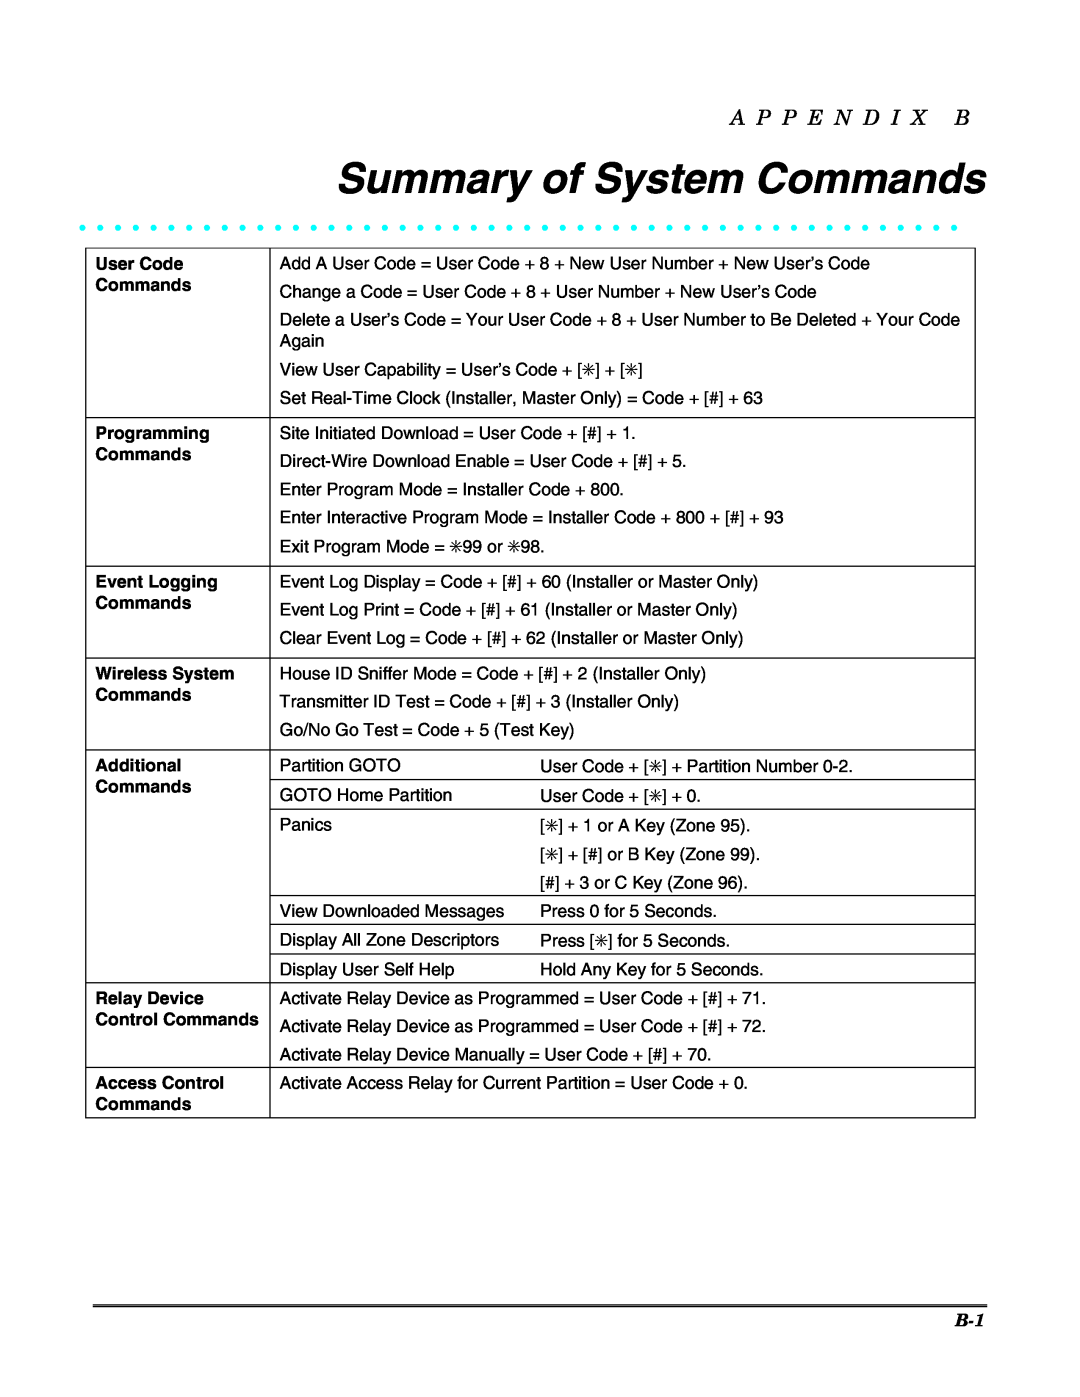 Honeywell 3.5 Summary of System Commands, A P P E N D I X B, User Code Commands Programming Commands, Additional Commands 